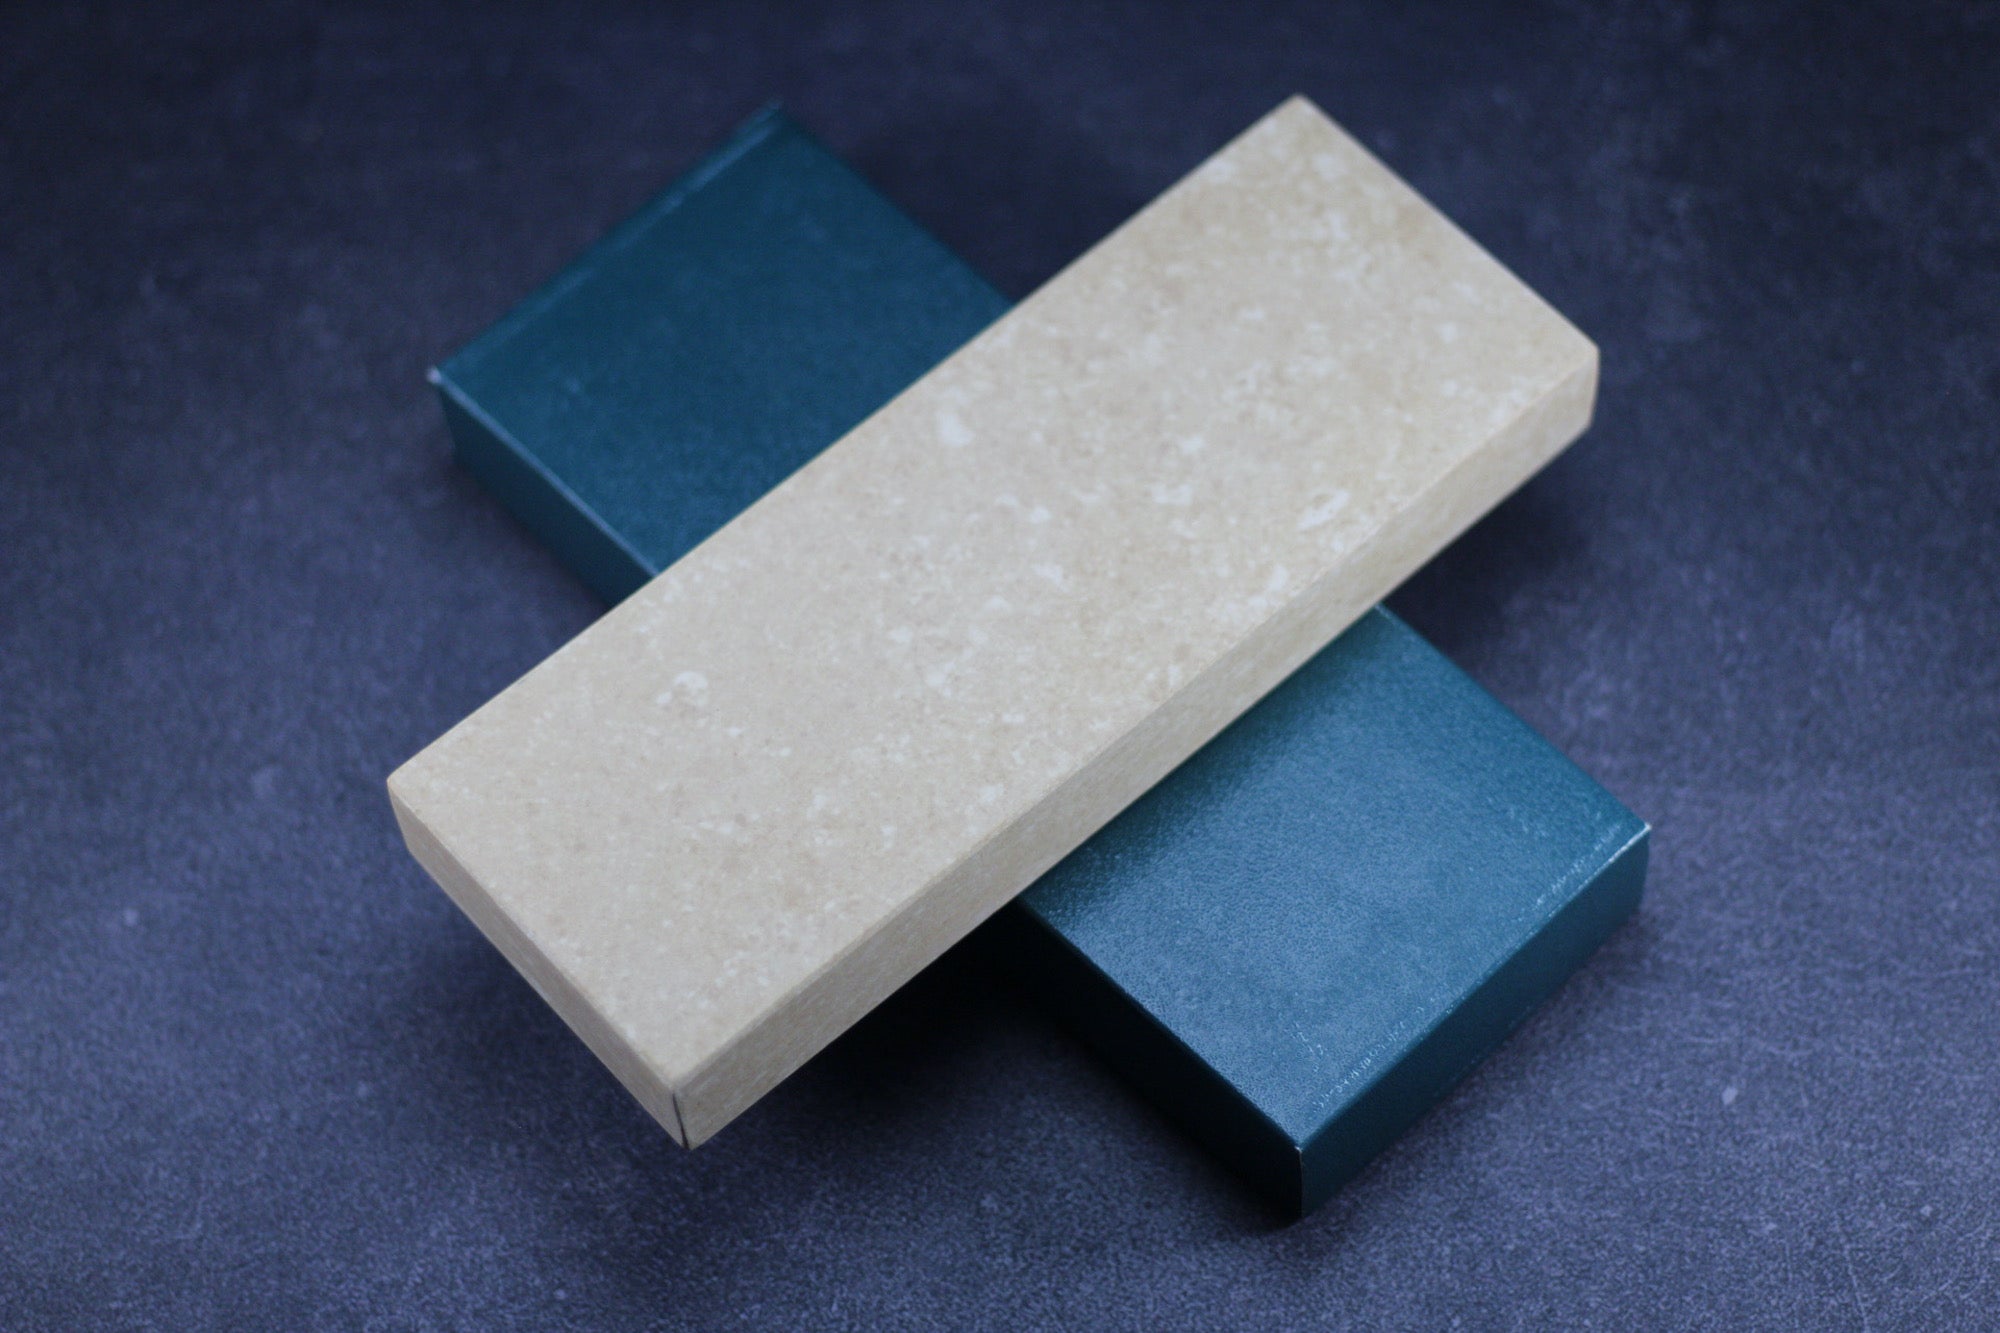 Marble 400 grit. Sharpening stone